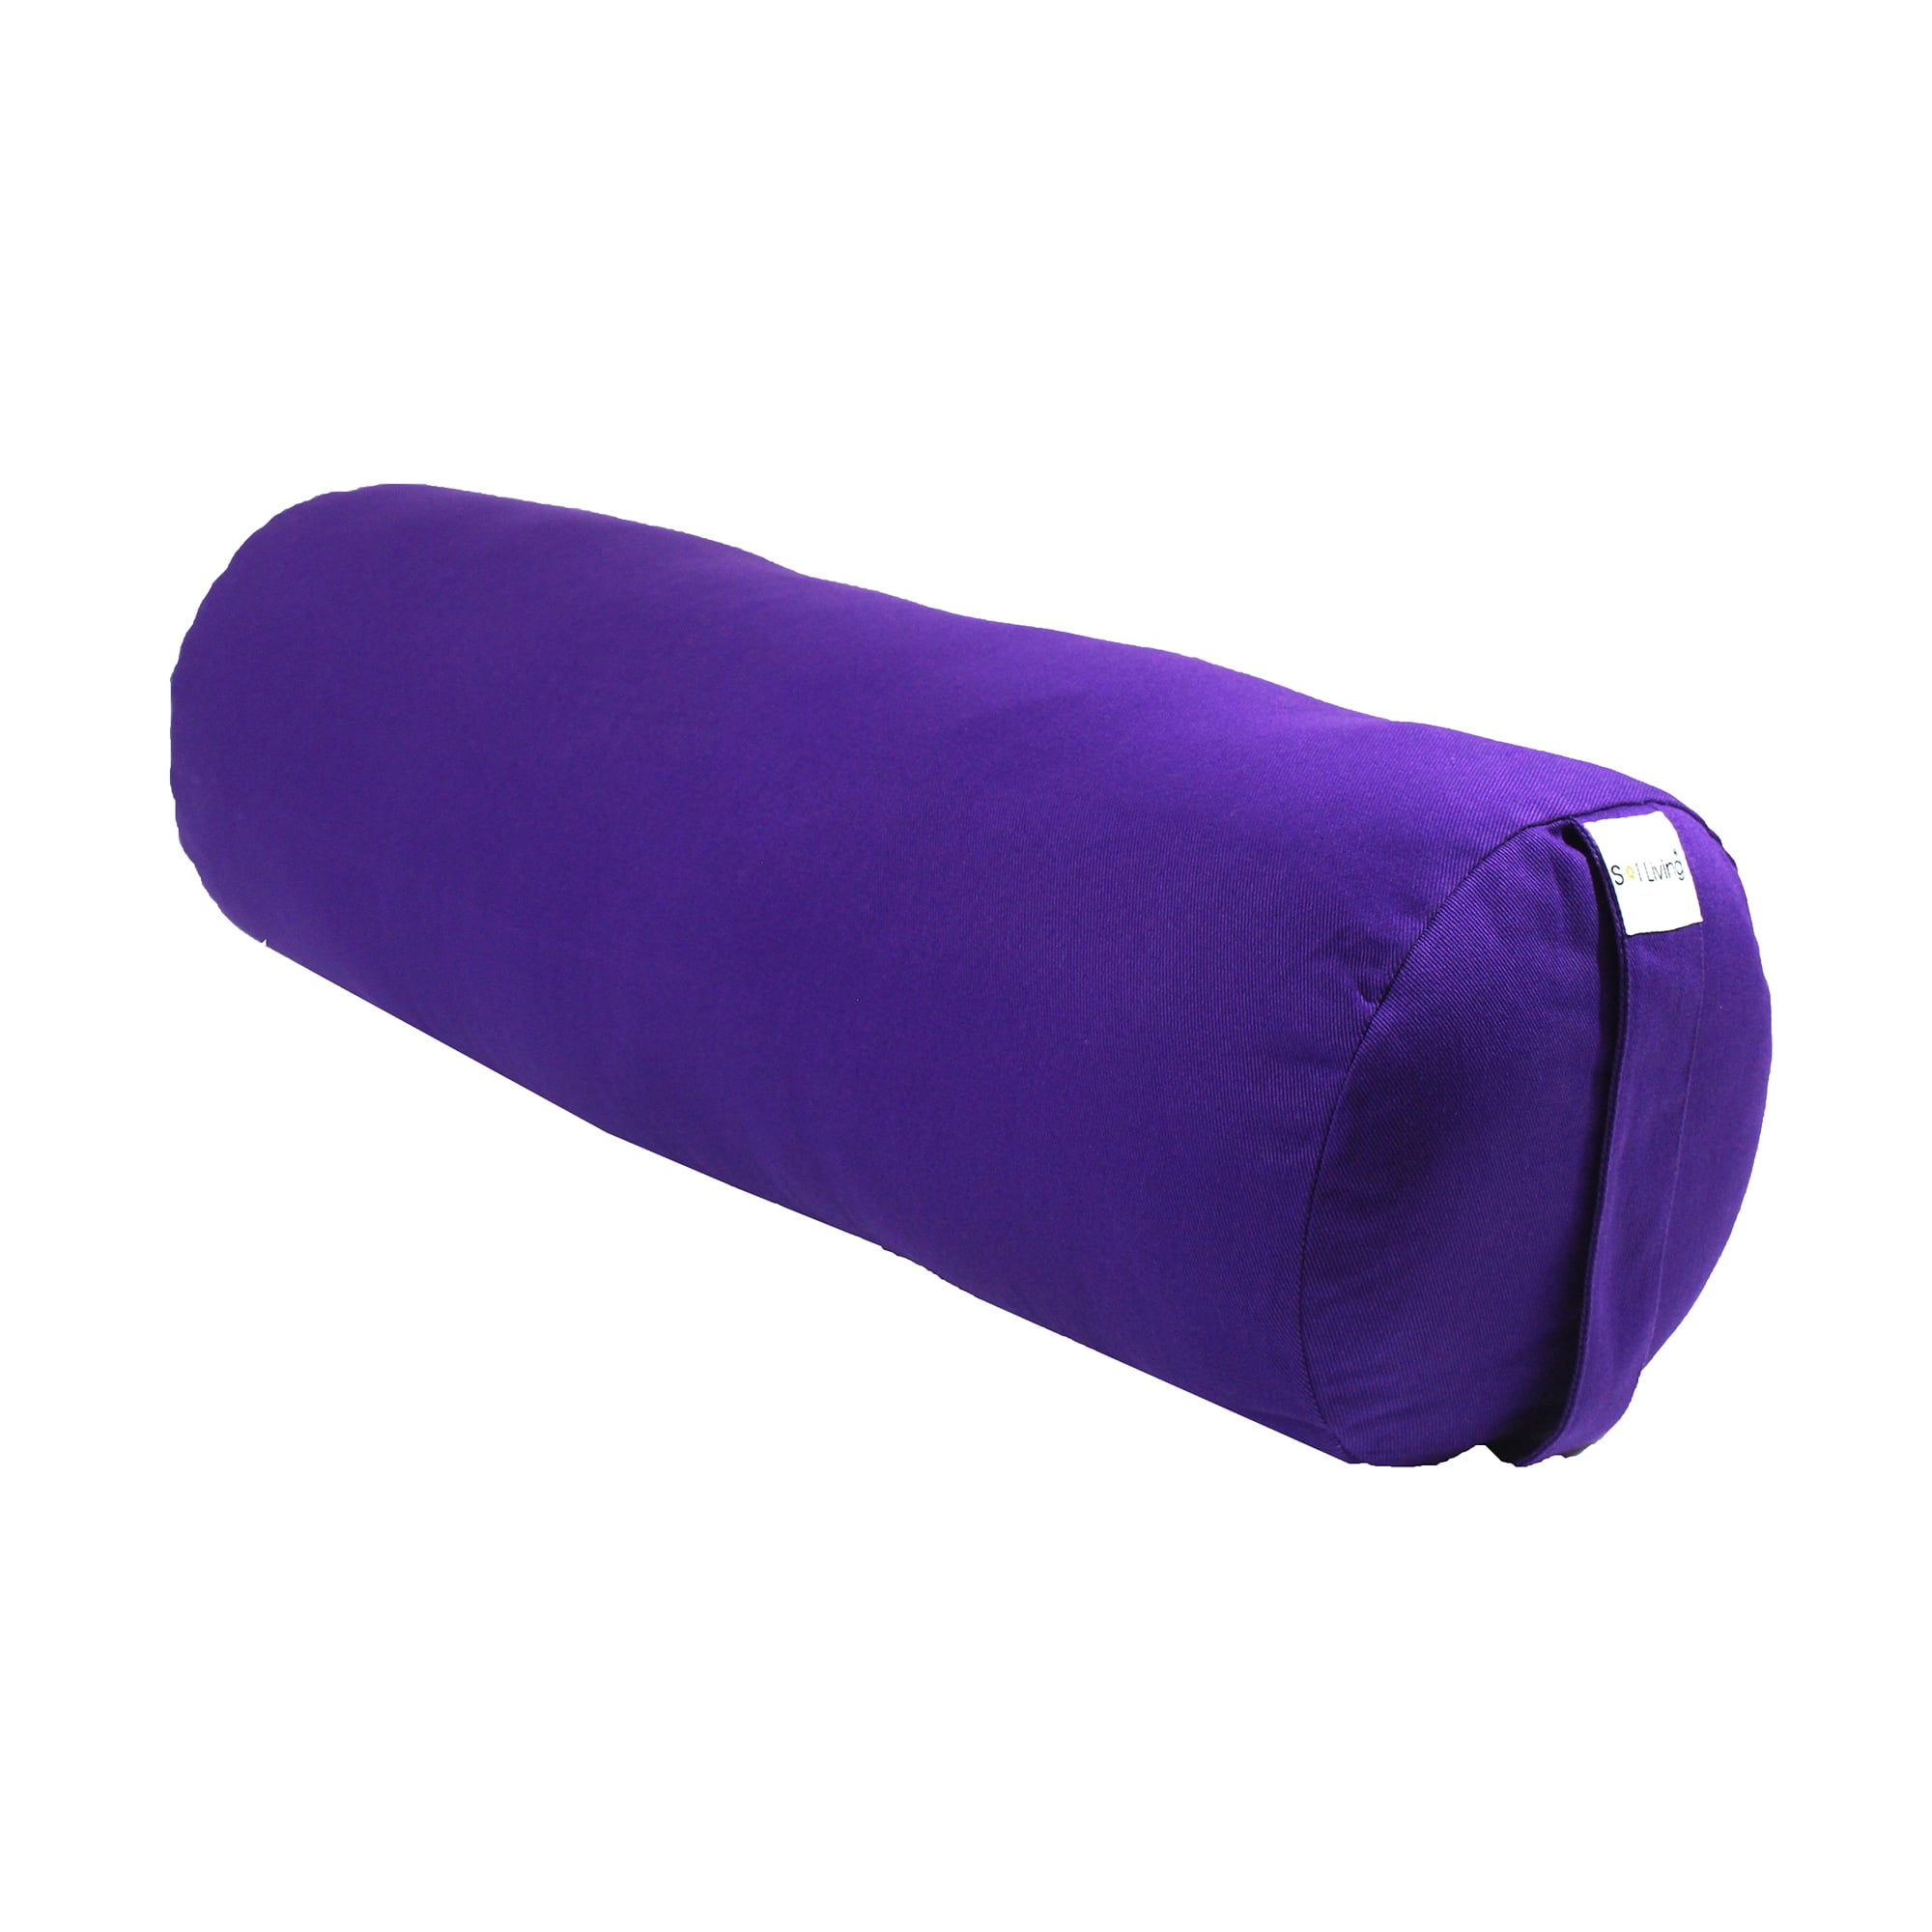 Cylindrical Yoga Cushion for Full Back Support and Core Stability Durable Eco-Friendly Yoga Accessory Sol Living 100% Organic Cotton Yoga Bolster 